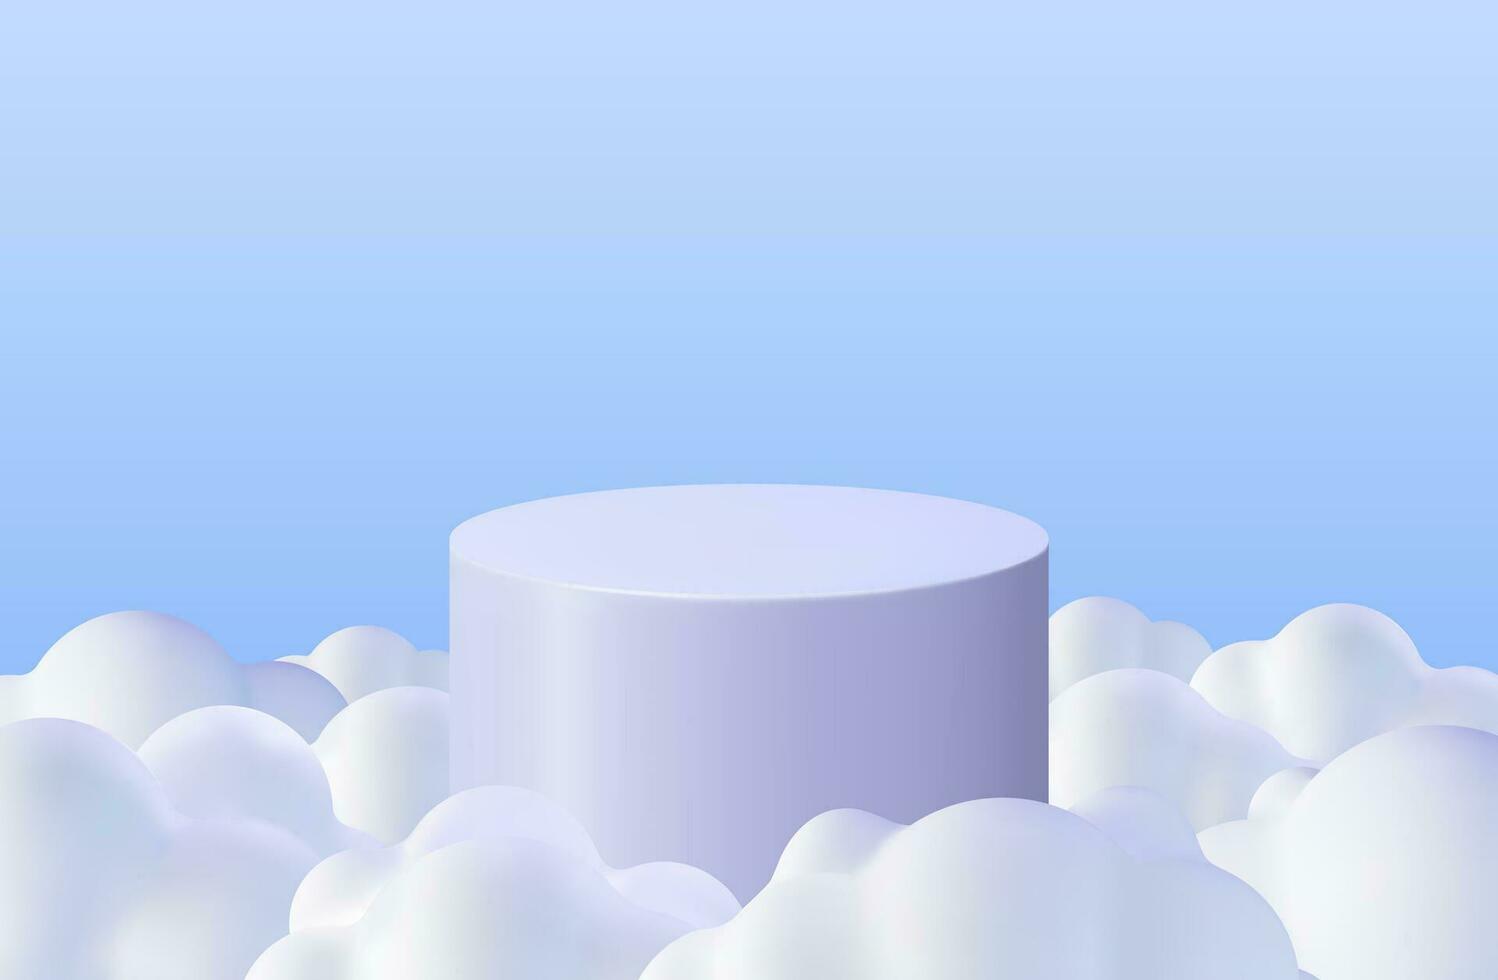 3D Blue Podium in Fluffy Clouds Background. Render Podium in Cloudy Scene. Abstract Platform in Blue Sky with Cartoon Clouds. Product Display Presentation Advertisement. Realistic Vector Illustration